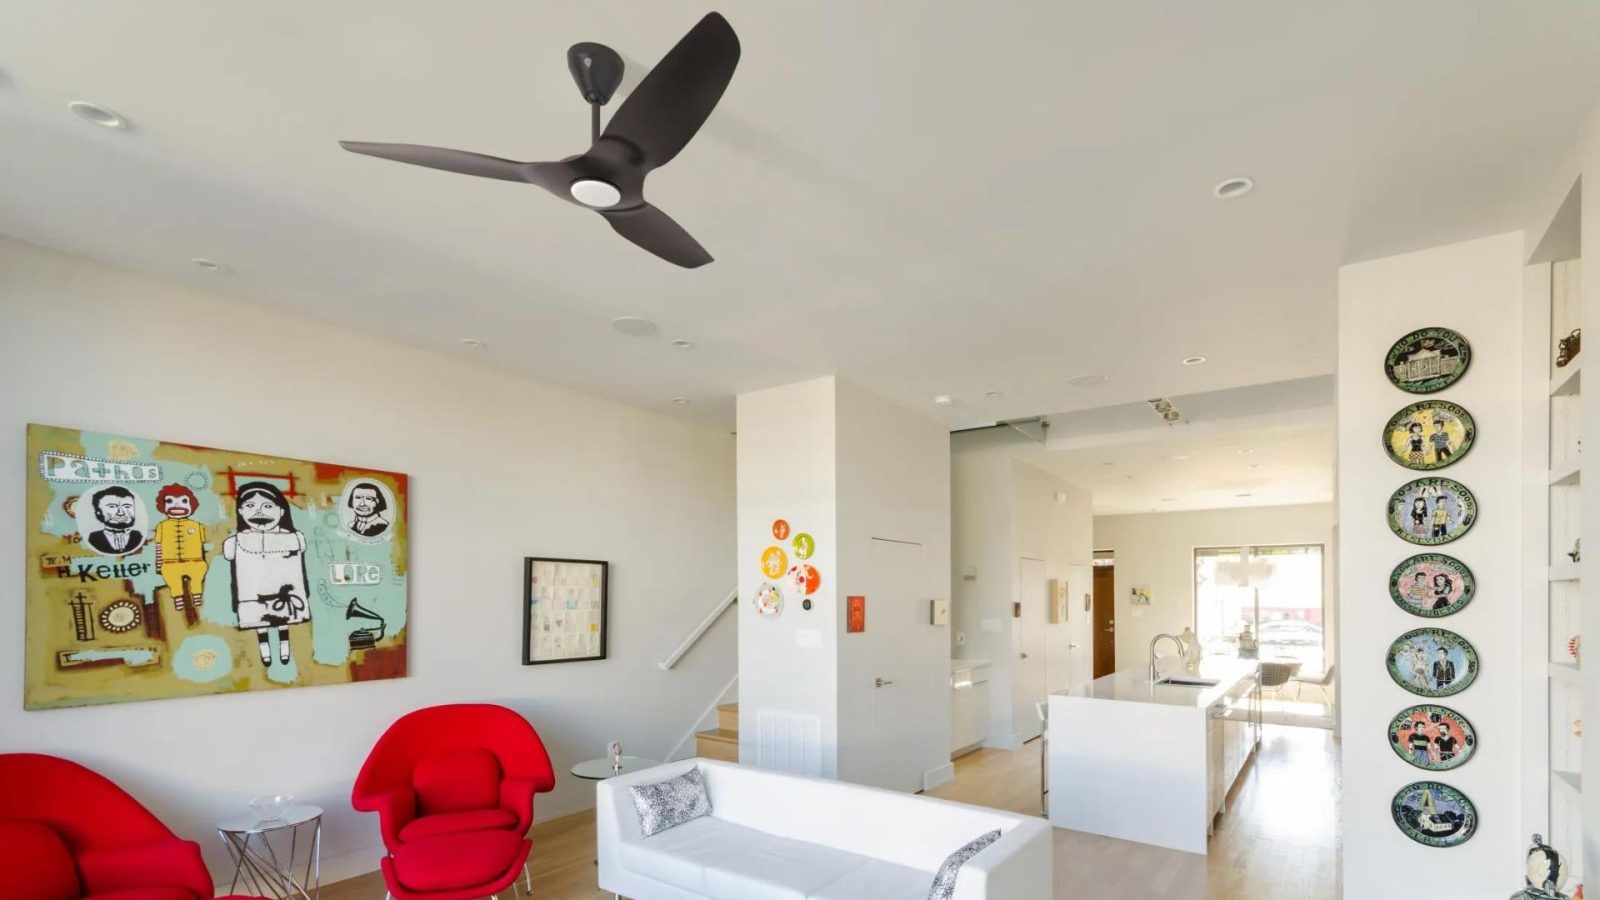 Best Premium Ceiling Fans To For Your Home In Singapore